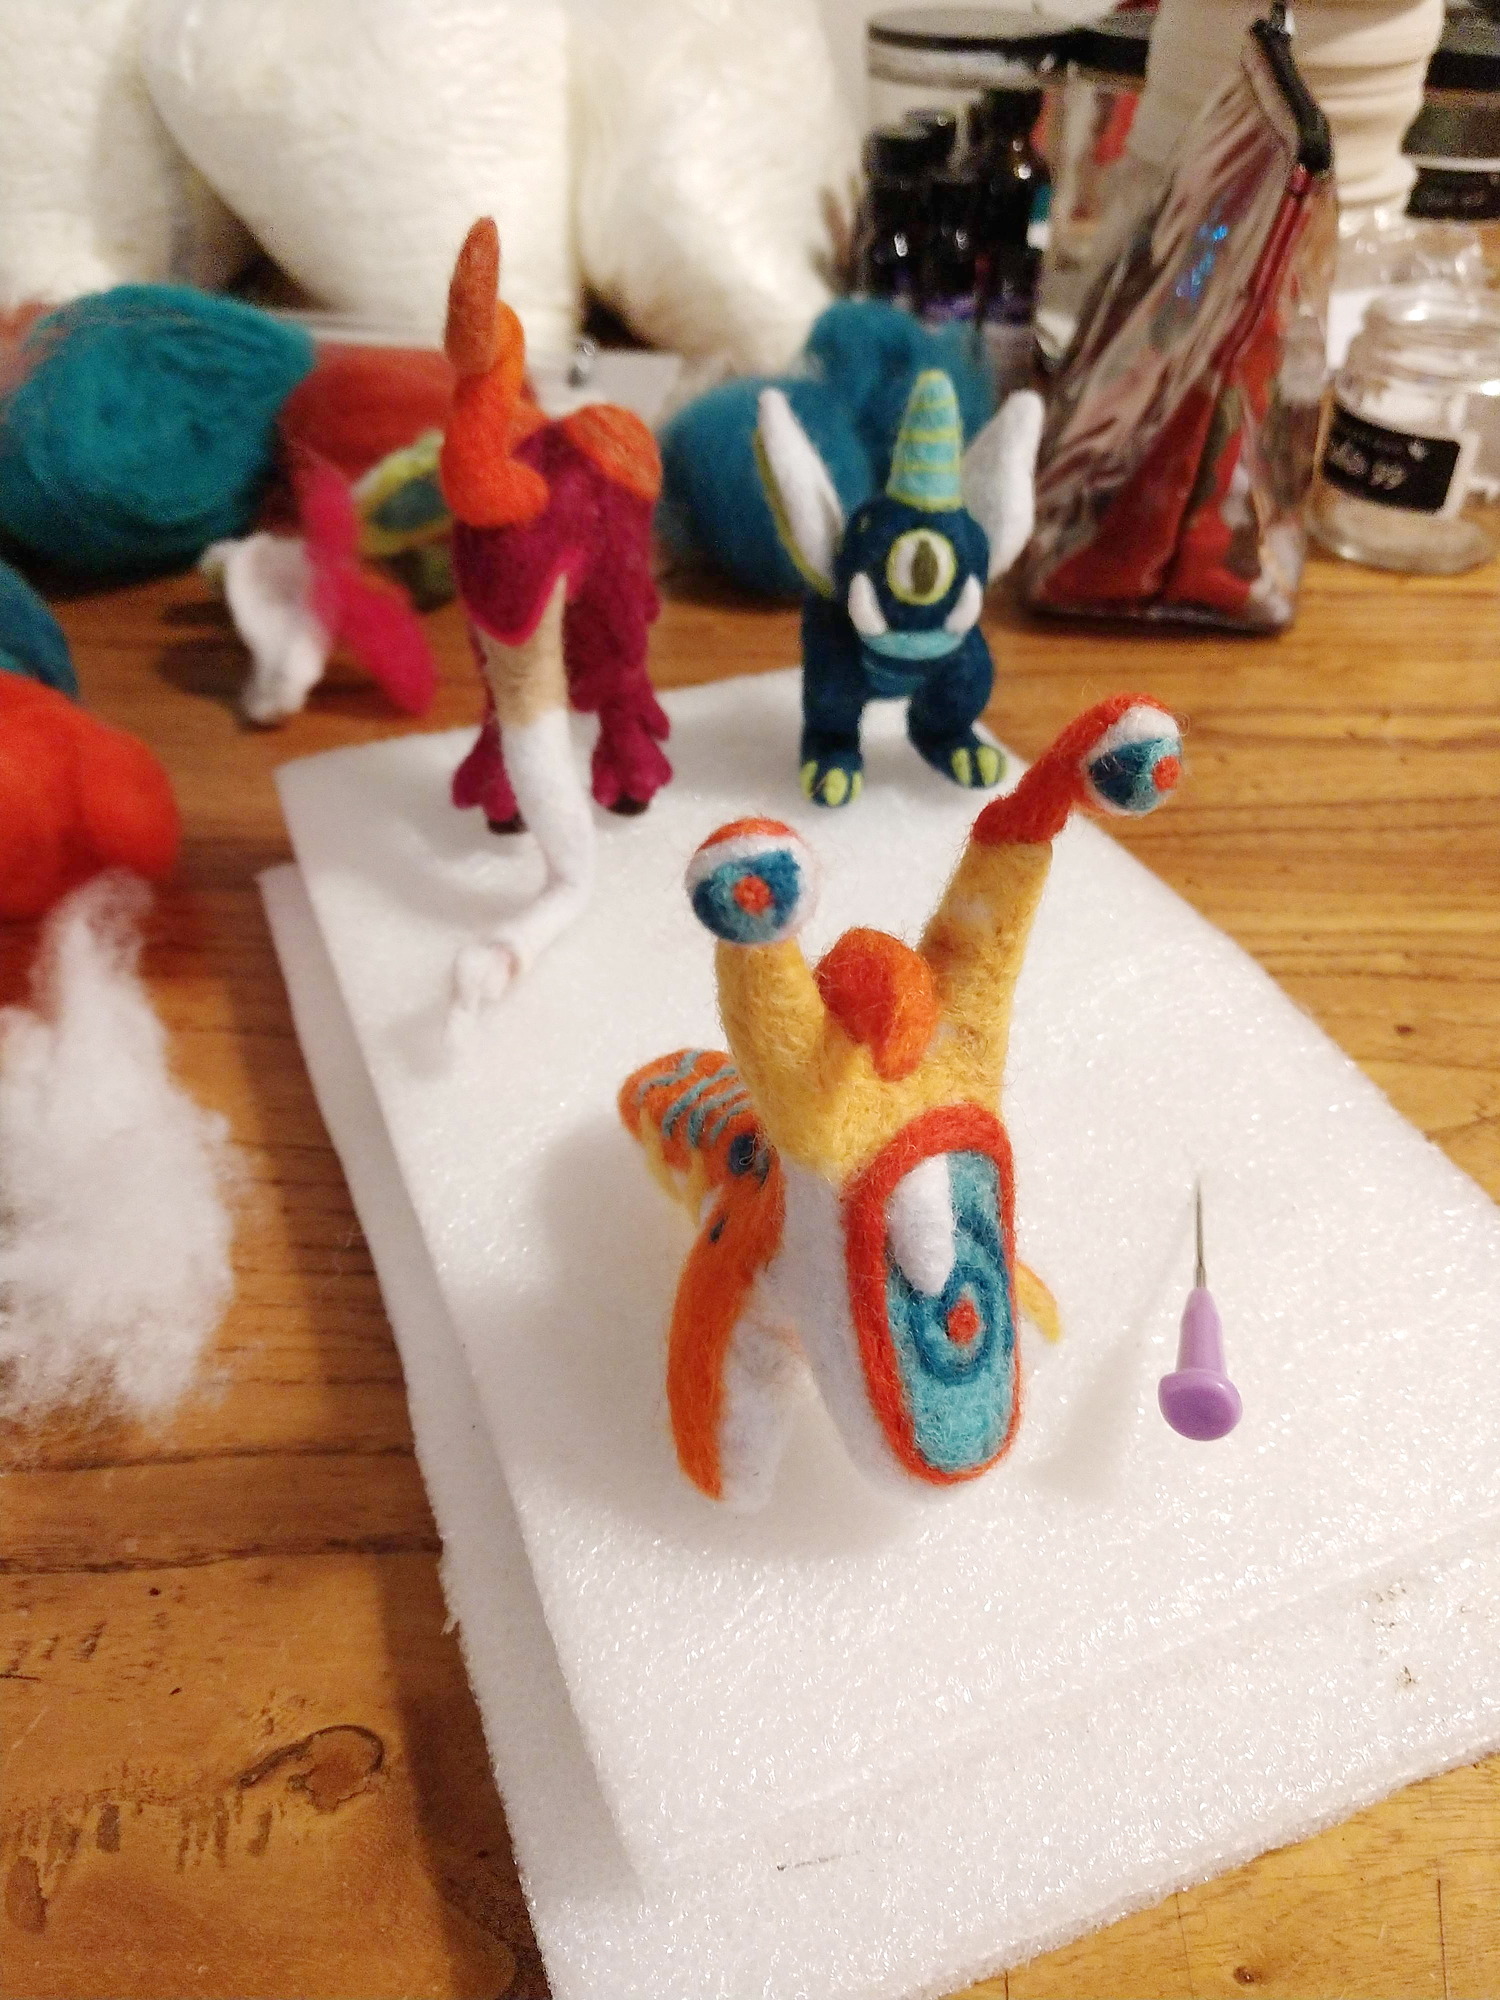 Cute Handmade Felt Monster Ornaments in the process of being created by hand, one poke at a time.